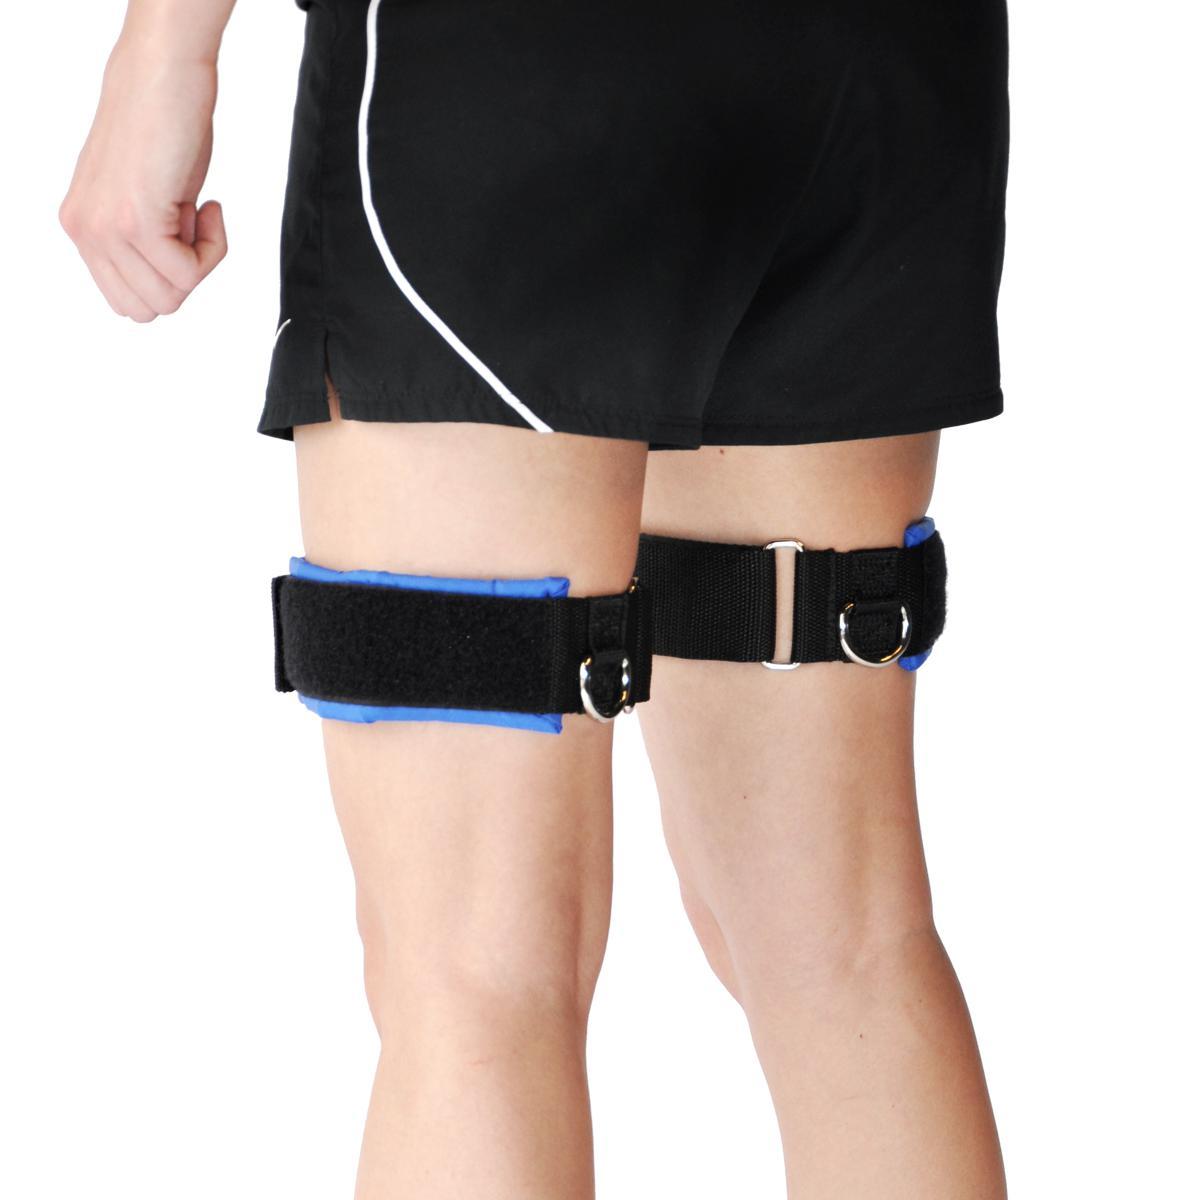 Thigh Cuffs for Resistance Band connection with D-Rings to clip bands to. Build stronger legs, run faster, tone your butt and thighs, Reduce leg fat